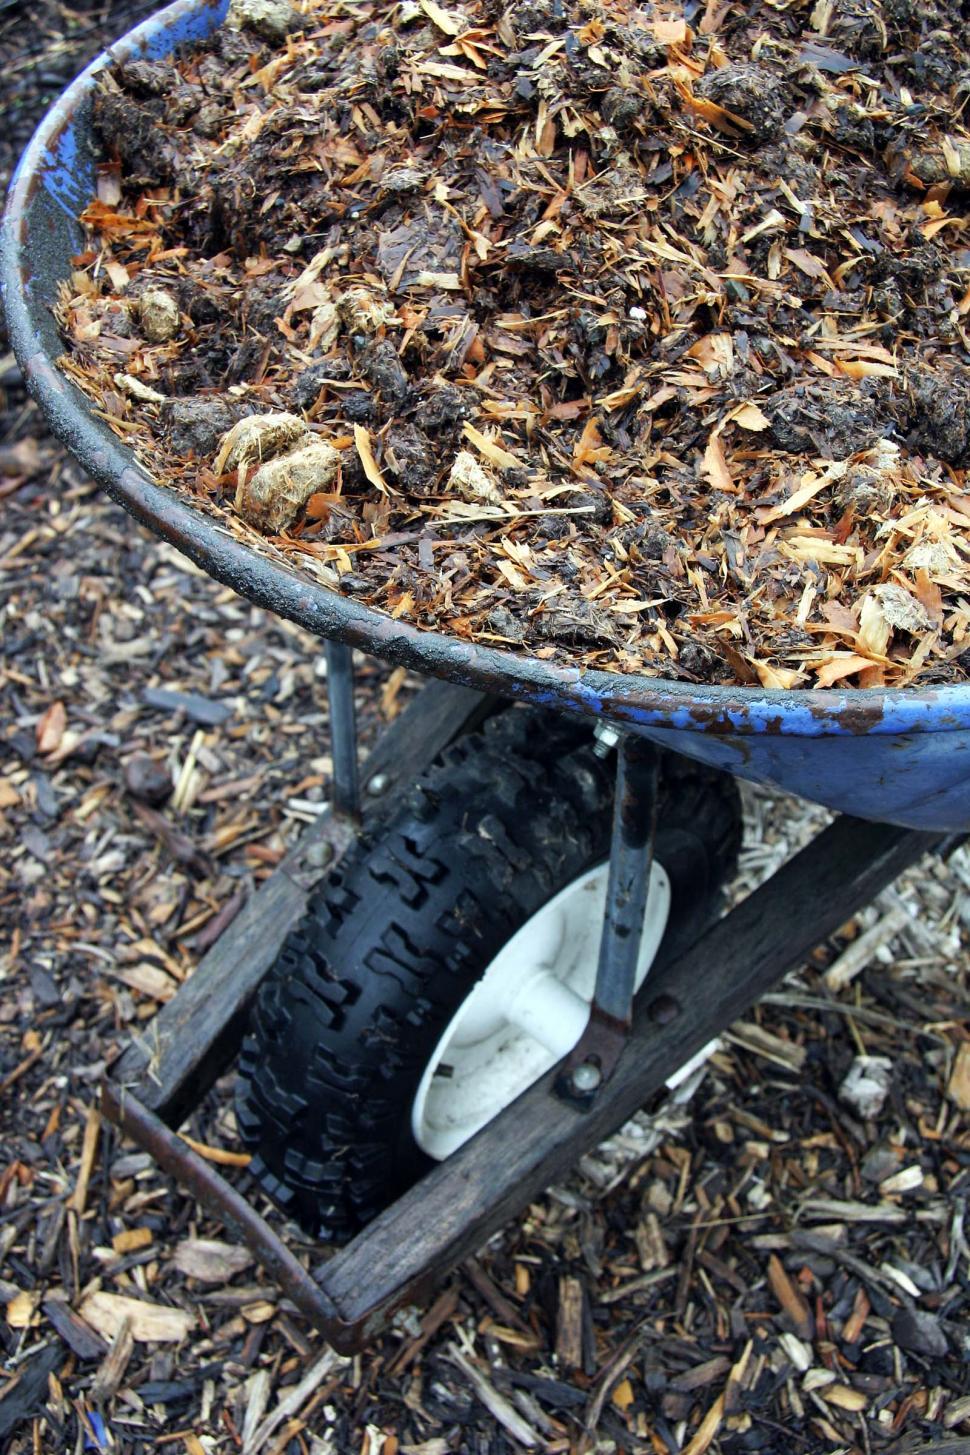 Free Image of Wheelbarrow Filled With Dirt and Mulch 